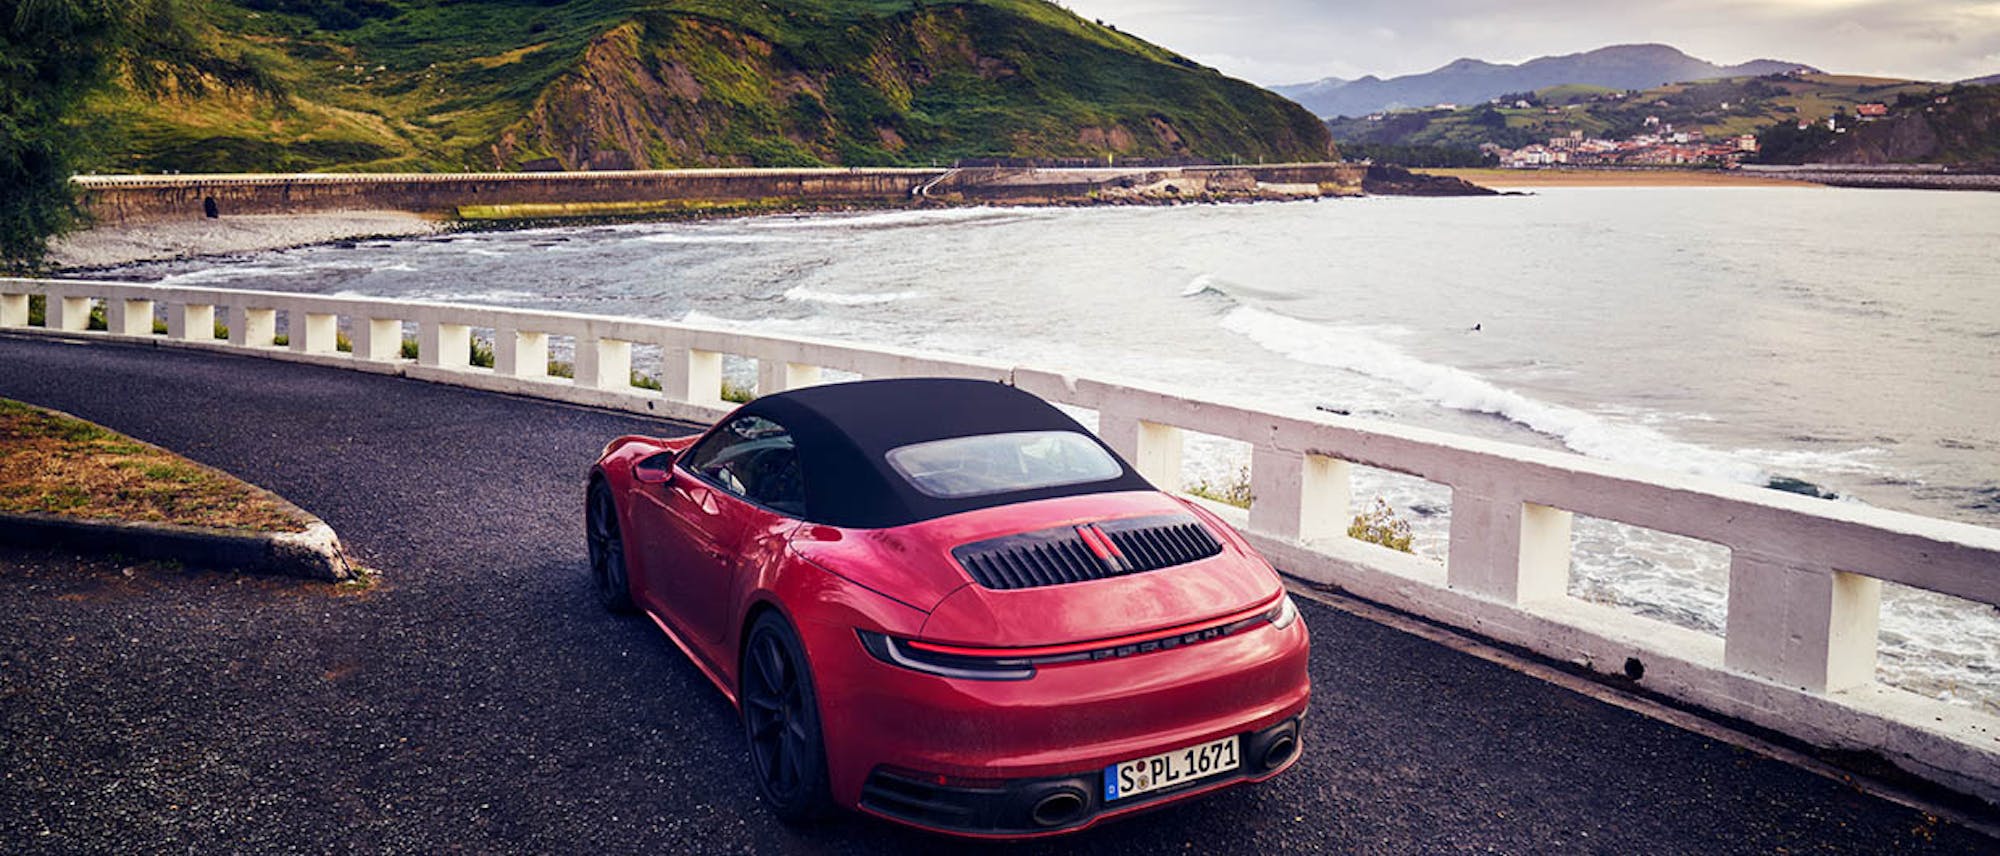 Red Porsche driving next to the lake